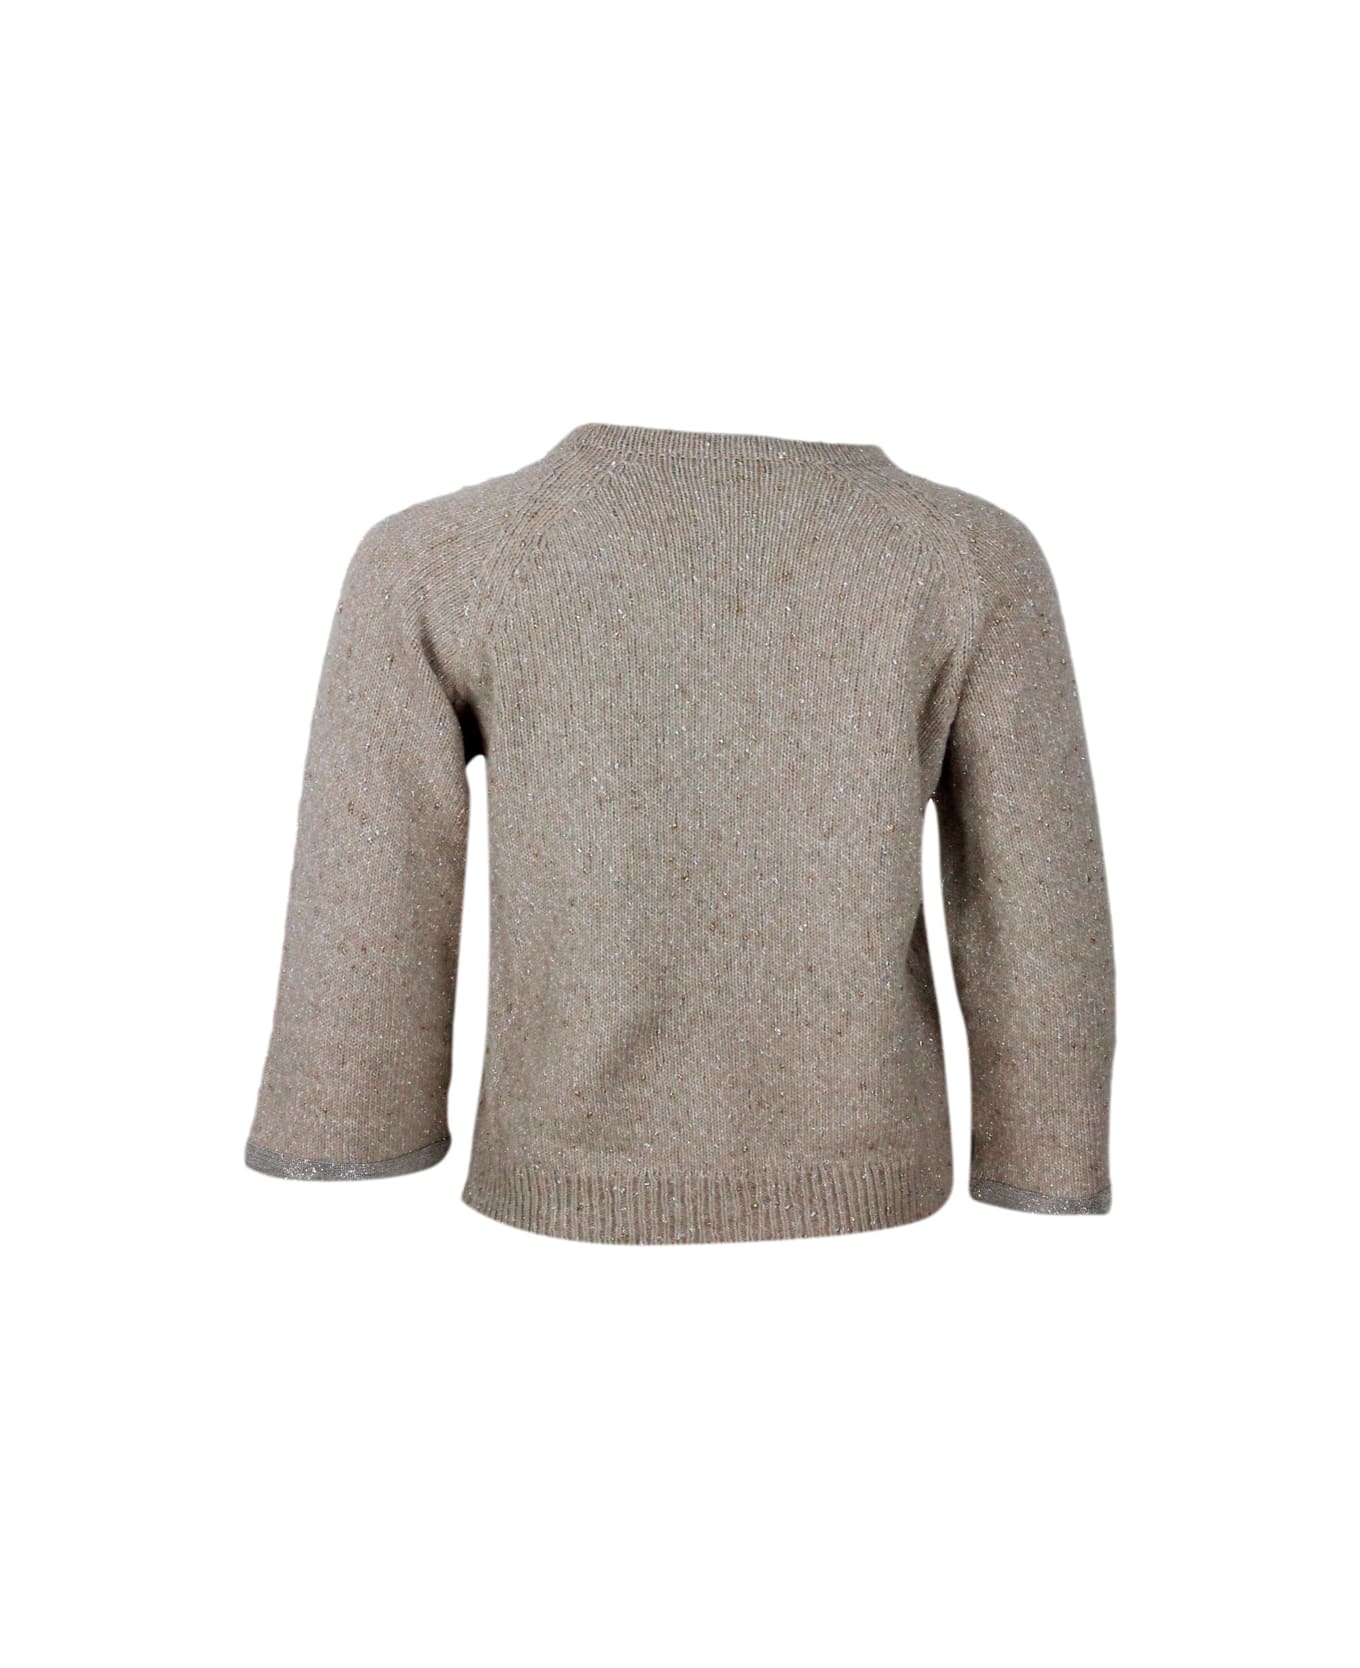 Fabiana Filippi Crewneck Sweater In Donegal Lamè Yarn With 3/4 Sleeves Embellished With Brilliant Jewel Details On The Sleeves - Beige